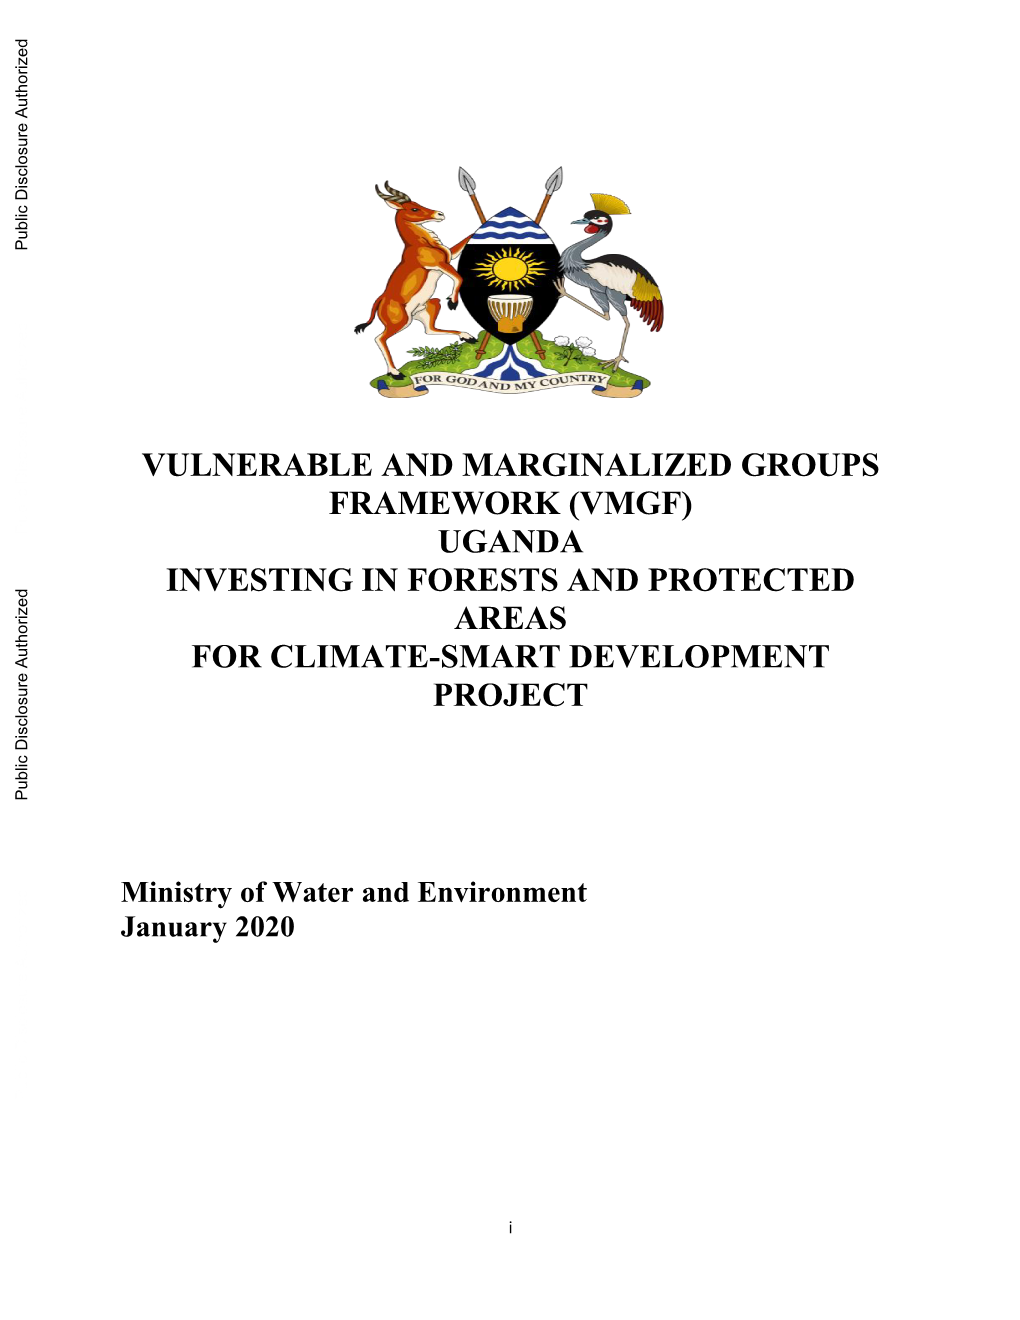 Uganda Investing in Forests and Protected Areas for Climate-Smart Development Project